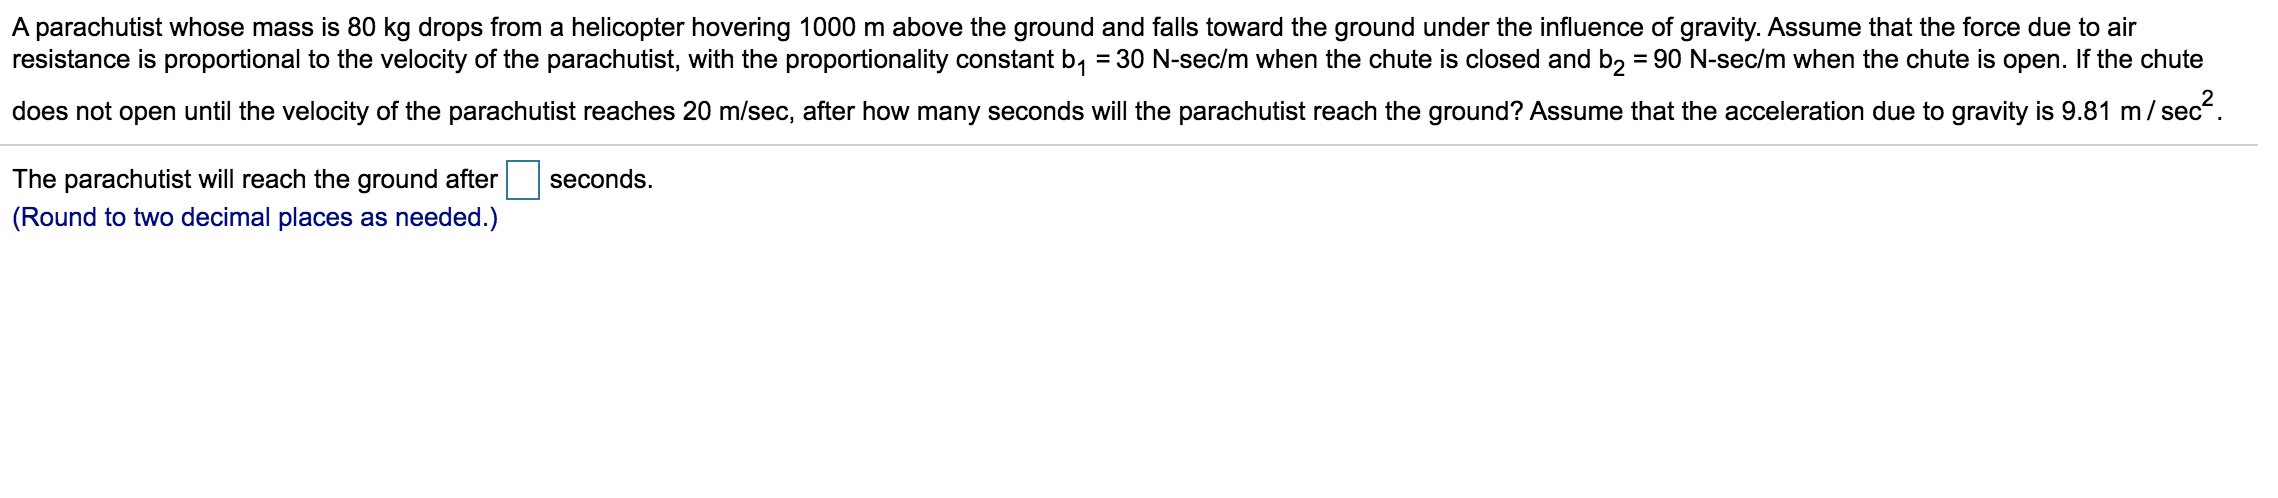 A parachutist whose mass is 80 kg drops from a helicopter hovering 1000 m above the ground and falls toward the ground under the influence of gravity. Assume that the force due to air
resistance is proportional to the velocity of the parachutist, with the proportionality constant b, = 30 N-sec/m when the chute is closed and b, = 90 N-sec/m when the chute is open. If the chute
does not open until the velocity of the parachutist reaches 20 m/sec, after how many seconds will the parachutist reach the ground? Assume that the acceleration due to gravity is 9.81 m/ sec.
